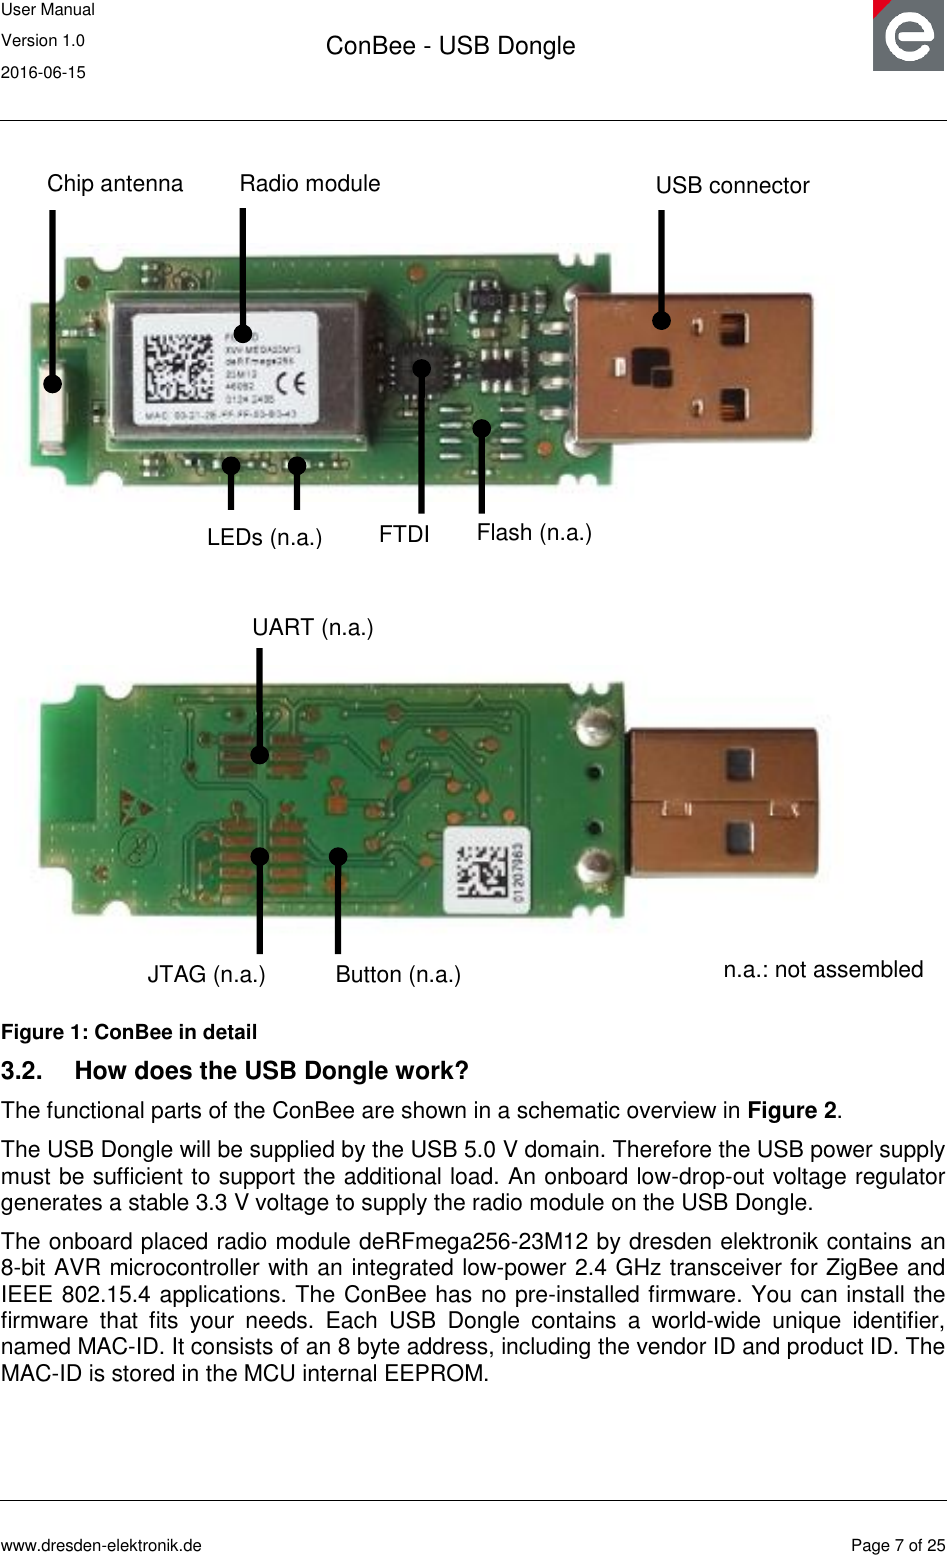 User Manual Version 1.0 2016-06-15  ConBee - USB Dongle      www.dresden-elektronik.de  Page 7 of 25   Figure 1: ConBee in detail 3.2.  How does the USB Dongle work? The functional parts of the ConBee are shown in a schematic overview in Figure 2. The USB Dongle will be supplied by the USB 5.0 V domain. Therefore the USB power supply must be sufficient to support the additional load. An onboard low-drop-out voltage regulator generates a stable 3.3 V voltage to supply the radio module on the USB Dongle. The onboard placed radio module deRFmega256-23M12 by dresden elektronik contains an 8-bit AVR microcontroller with an integrated low-power 2.4 GHz transceiver for ZigBee and IEEE 802.15.4 applications. The ConBee has no pre-installed firmware. You can install the firmware  that  fits  your  needs.  Each  USB  Dongle  contains  a  world-wide  unique  identifier, named MAC-ID. It consists of an 8 byte address, including the vendor ID and product ID. The MAC-ID is stored in the MCU internal EEPROM. Radio module Chip antenna USB connector Flash (n.a.) LEDs (n.a.) FTDI UART (n.a.) JTAG (n.a.) Button (n.a.) n.a.: not assembled 